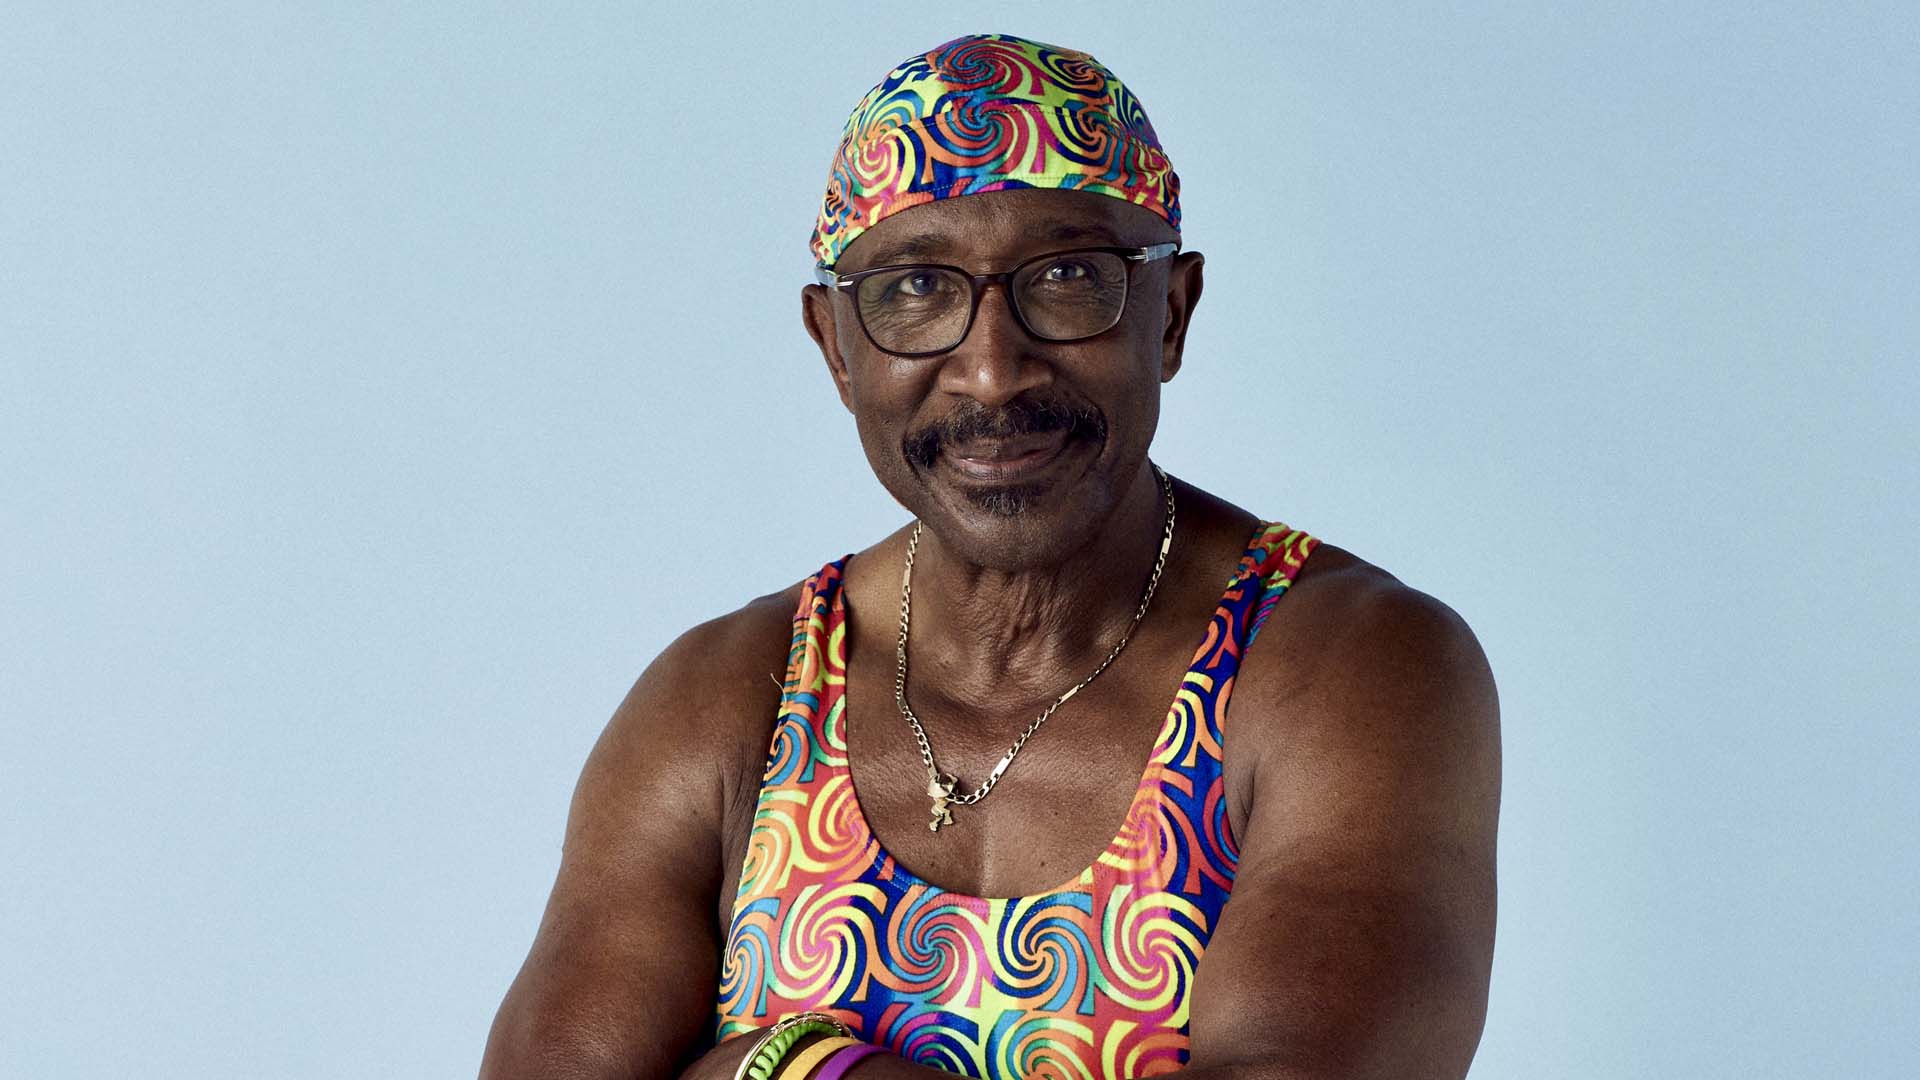 Mr Motivator opens up about his incredible life